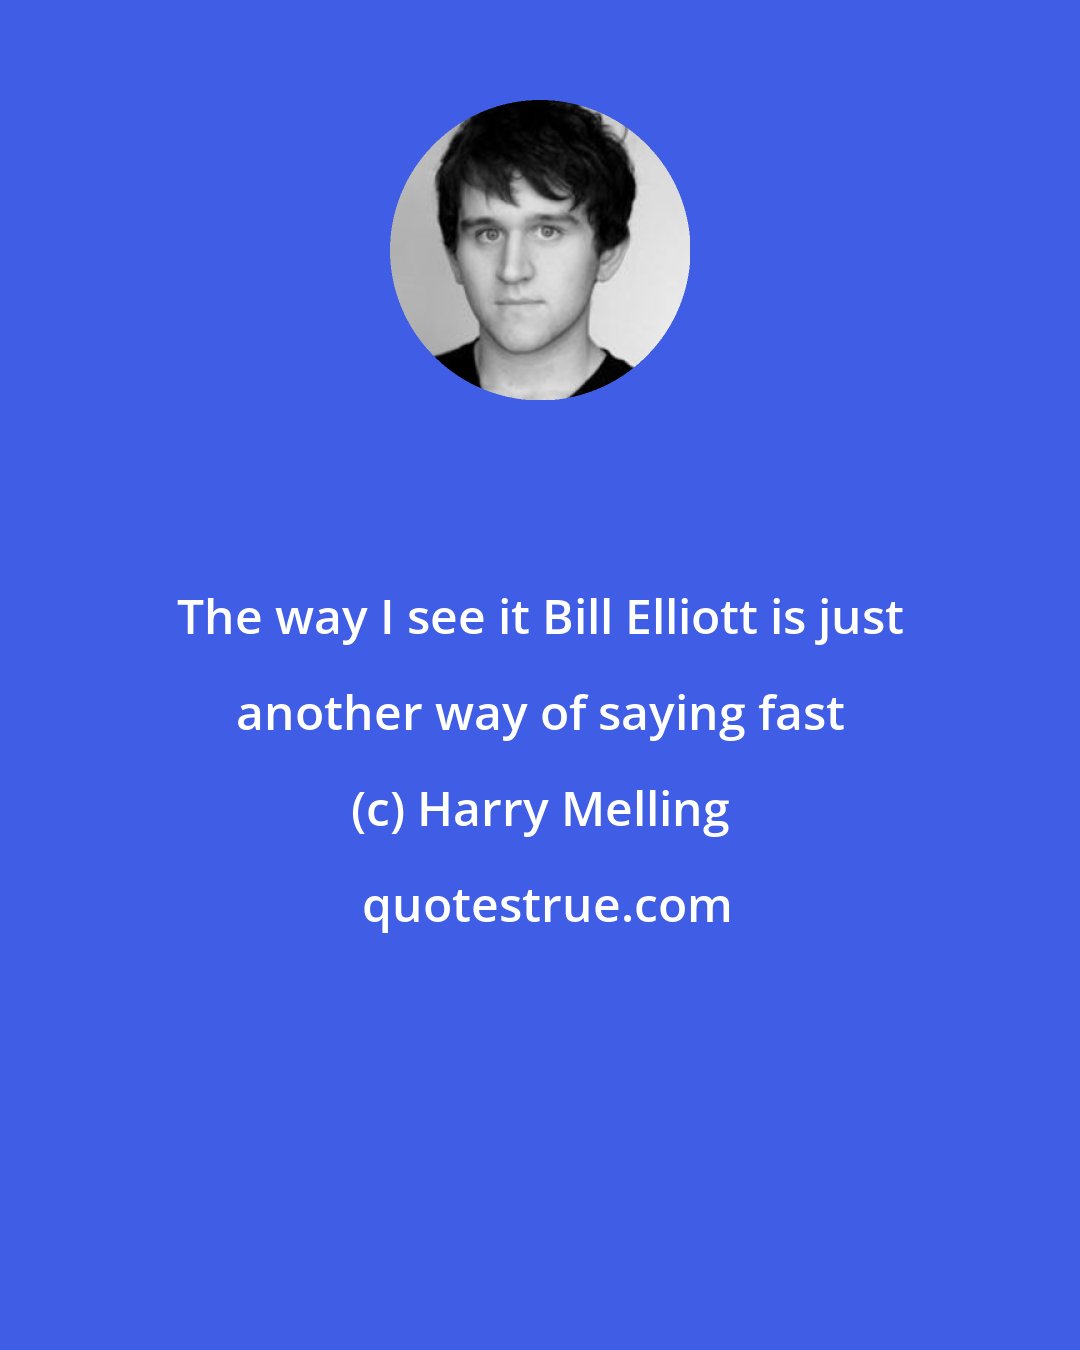 Harry Melling: The way I see it Bill Elliott is just another way of saying fast